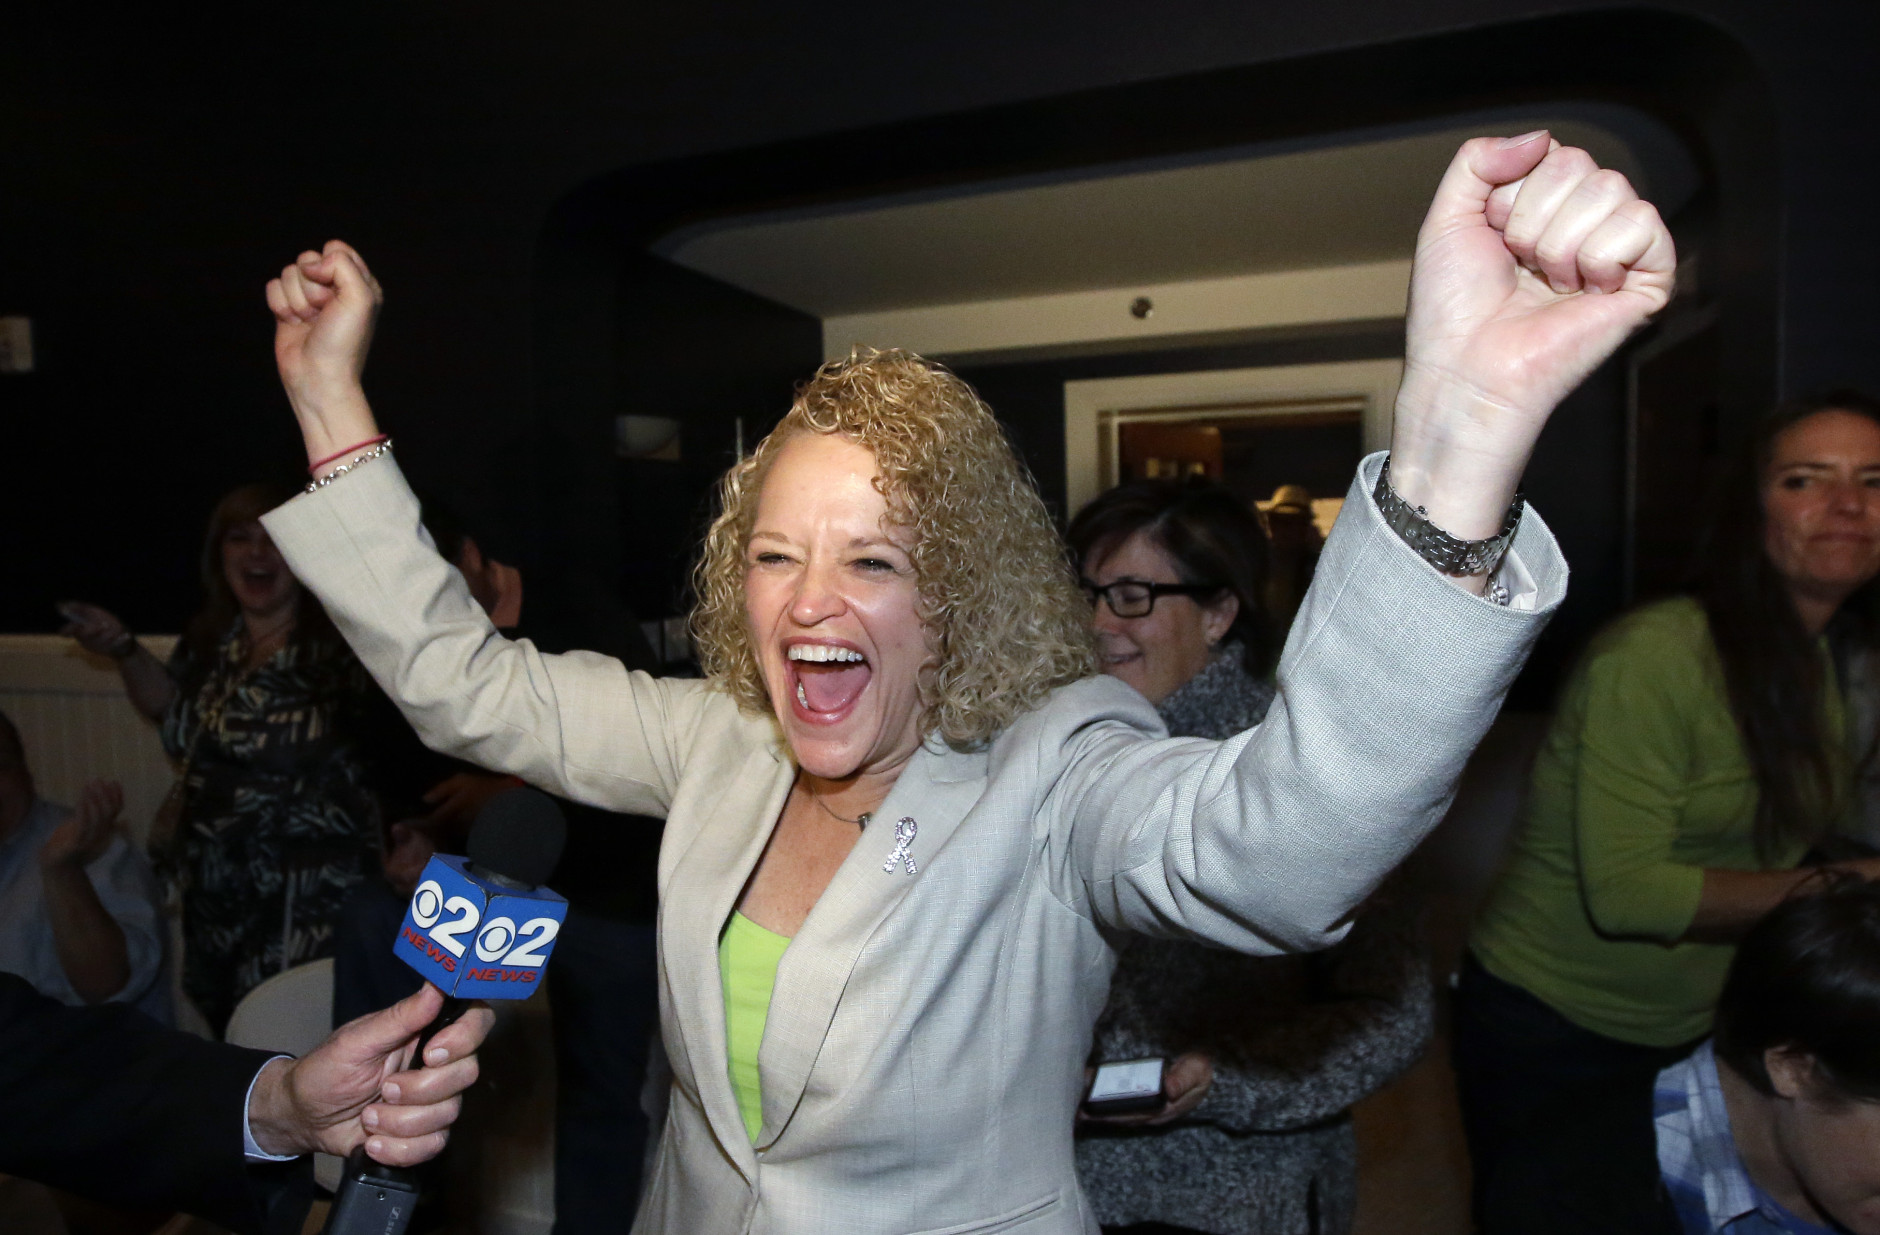 Former state lawmaker Jackie Biskupski reacts as results come in at her election night party for Salt Lake City Mayor, Tuesday, Nov. 3, 2015, in Salt Lake City. Biskupski faces incumbent Ralph Becker in the mayor's race, and would be the city's first openly gay leader if elected. (AP Photo/Rick Bowmer)